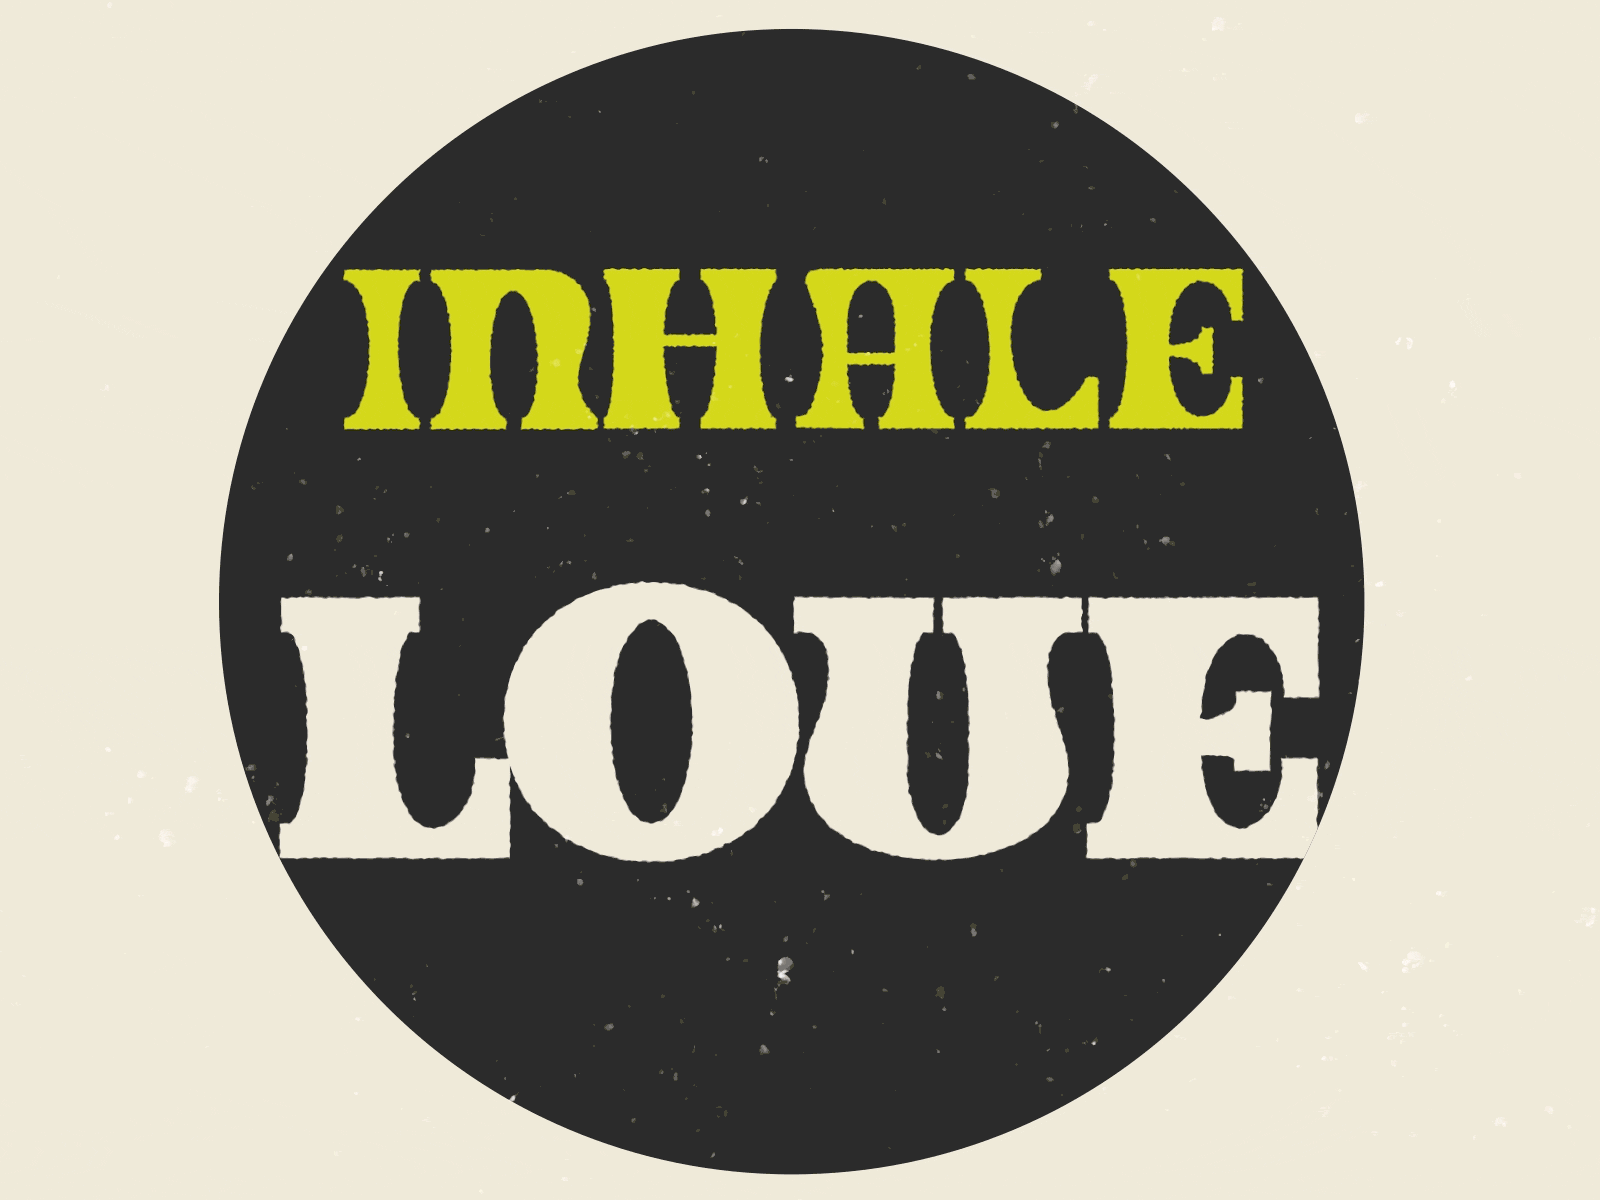 Inhale LOVE, exhale GRACE 2danimation animation exhale grace inhale kinetictypography logo love lungs motion graphics peace typography valentine yoga